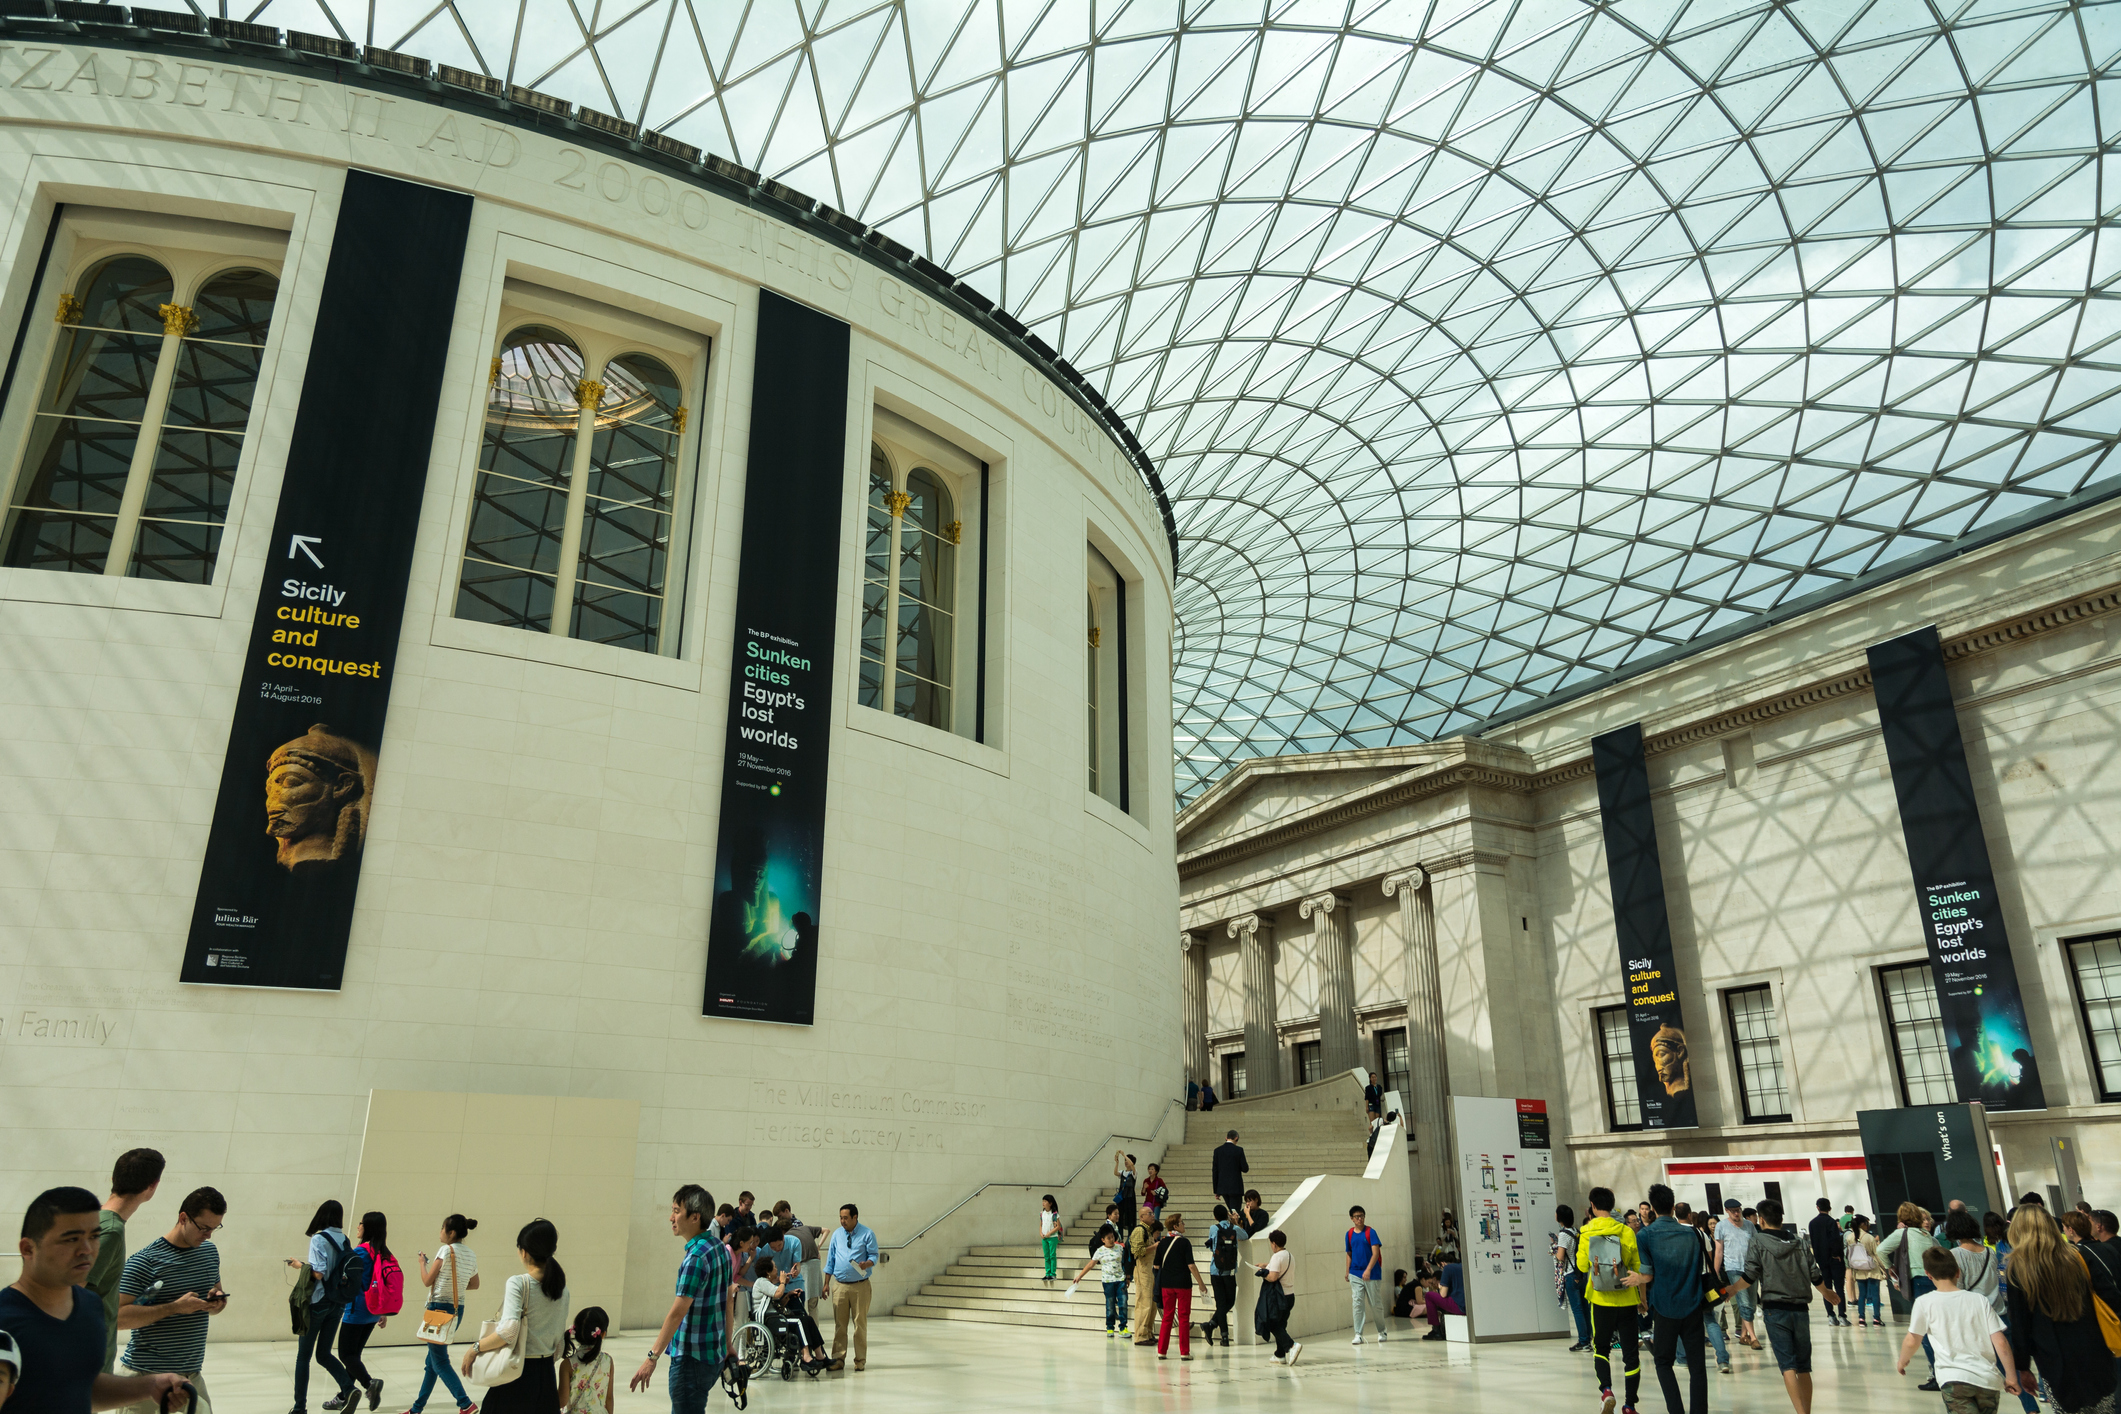 Tourists at the British Museum, picture taken from the interior